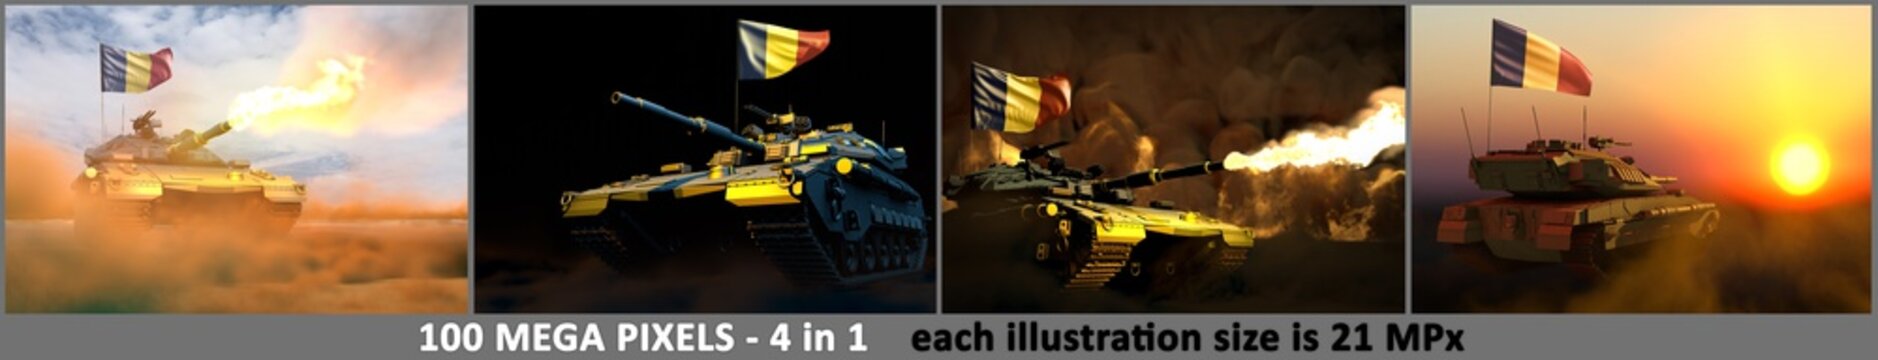 Romania army concept - 4 highly detailed pictures of tank with not real design with Romania flag and free place for your text, military 3D Illustration